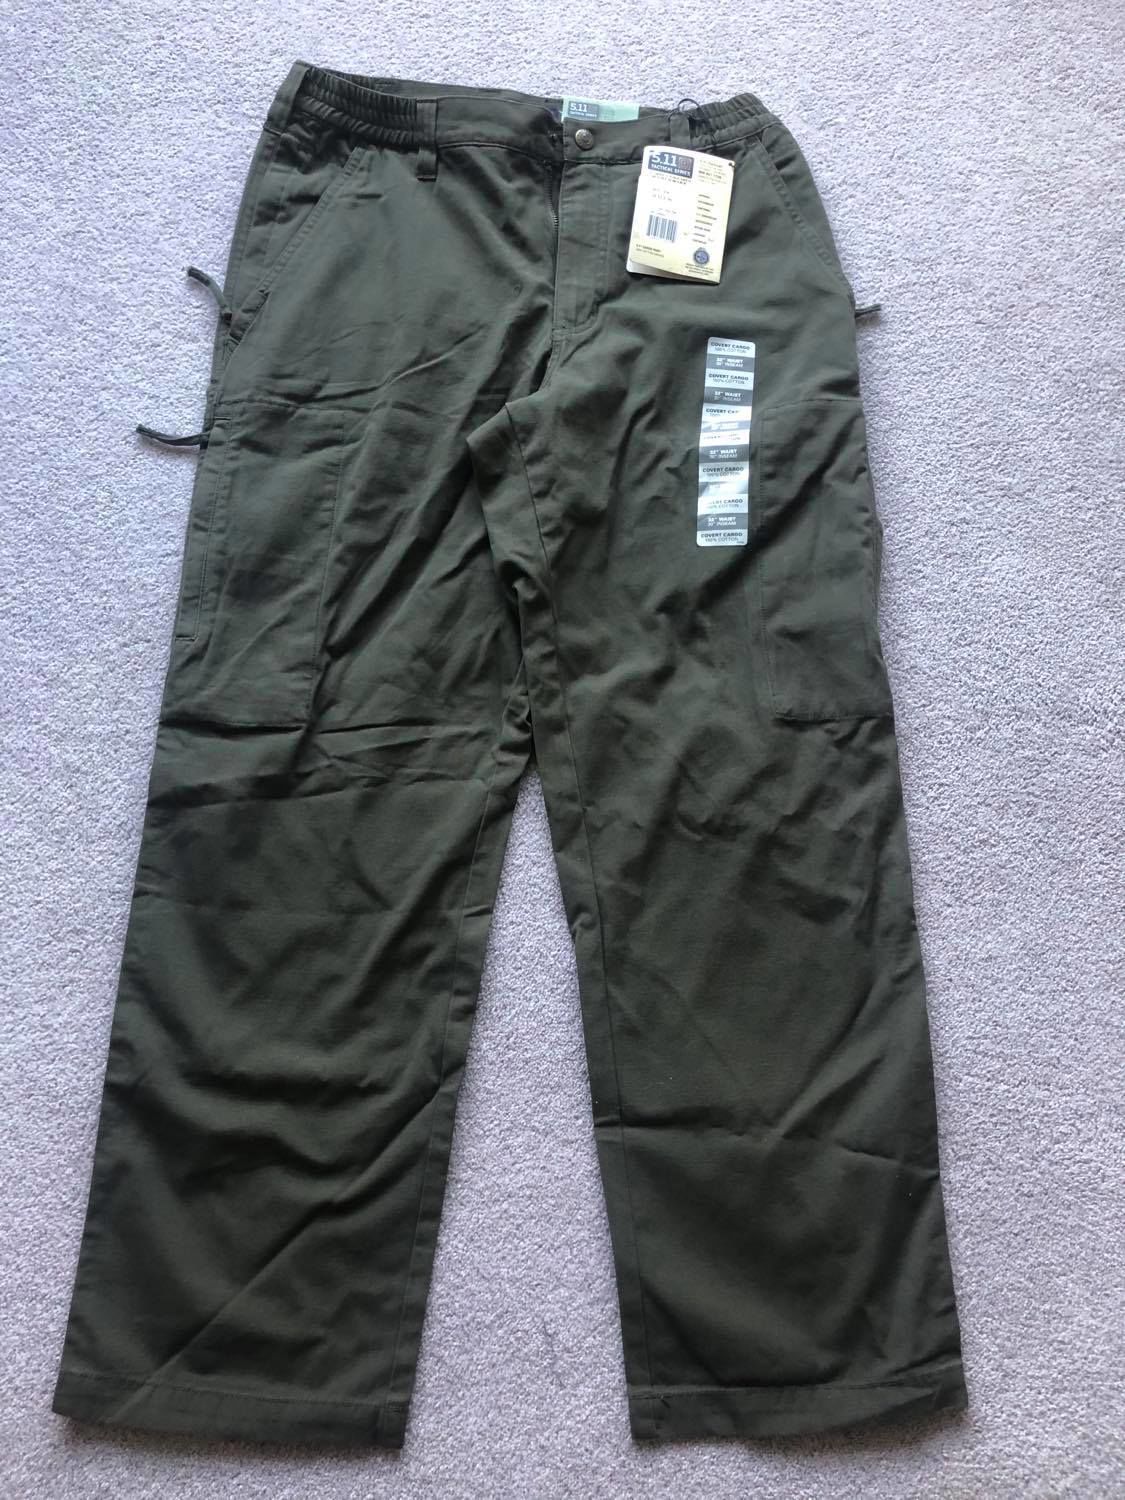 5.11 Tactical Pants 32x30 Green New with tags unworn - Gear - Airsoft ...